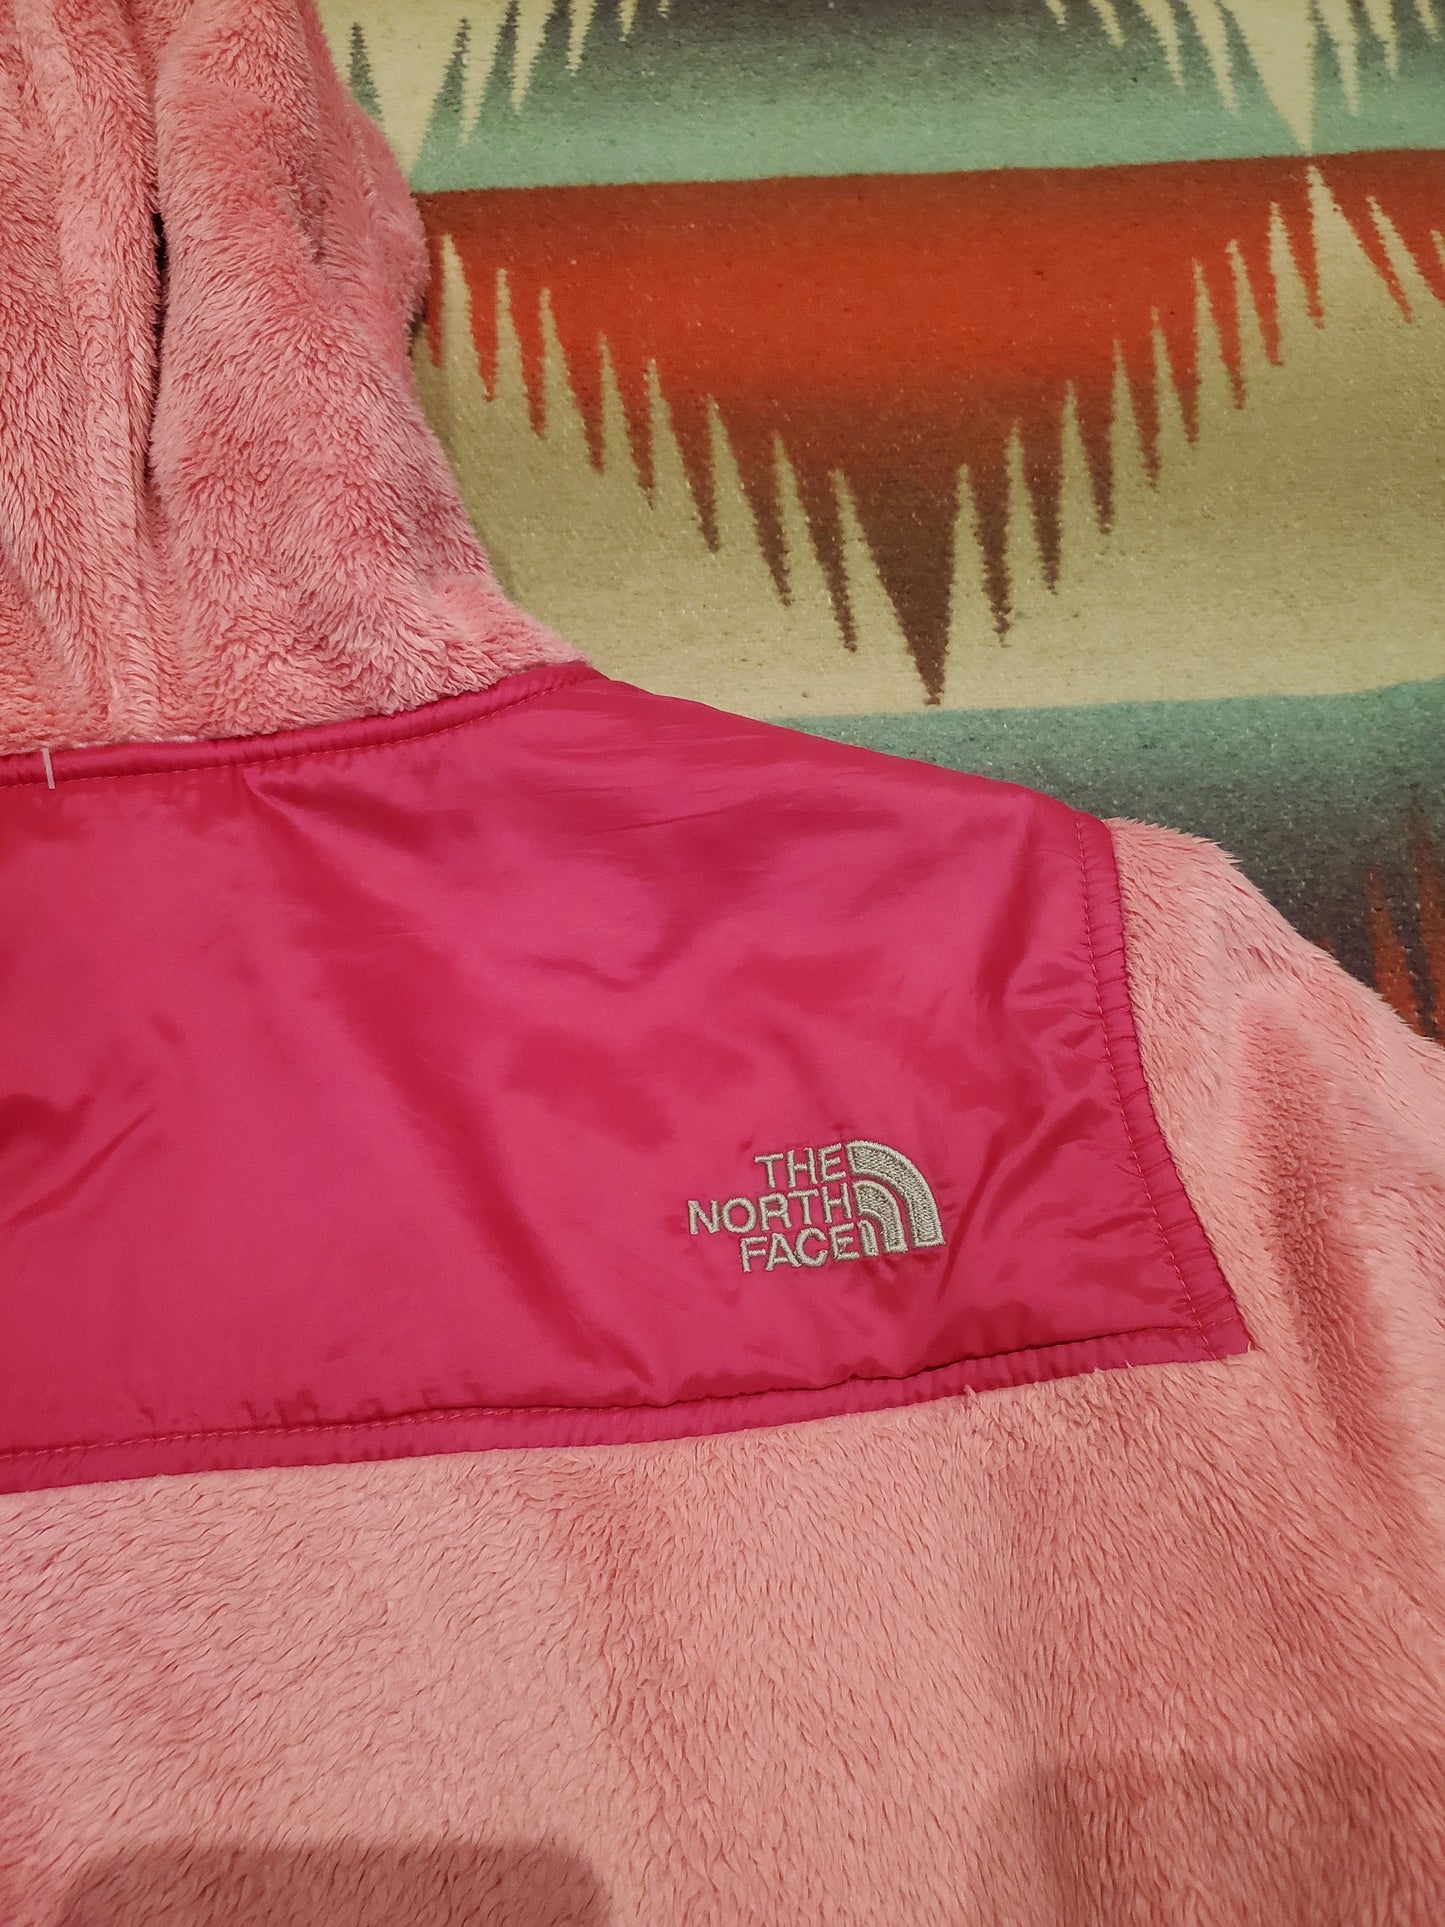 2010s The North Face TNF Pink Fleece Jacket Women's Size L